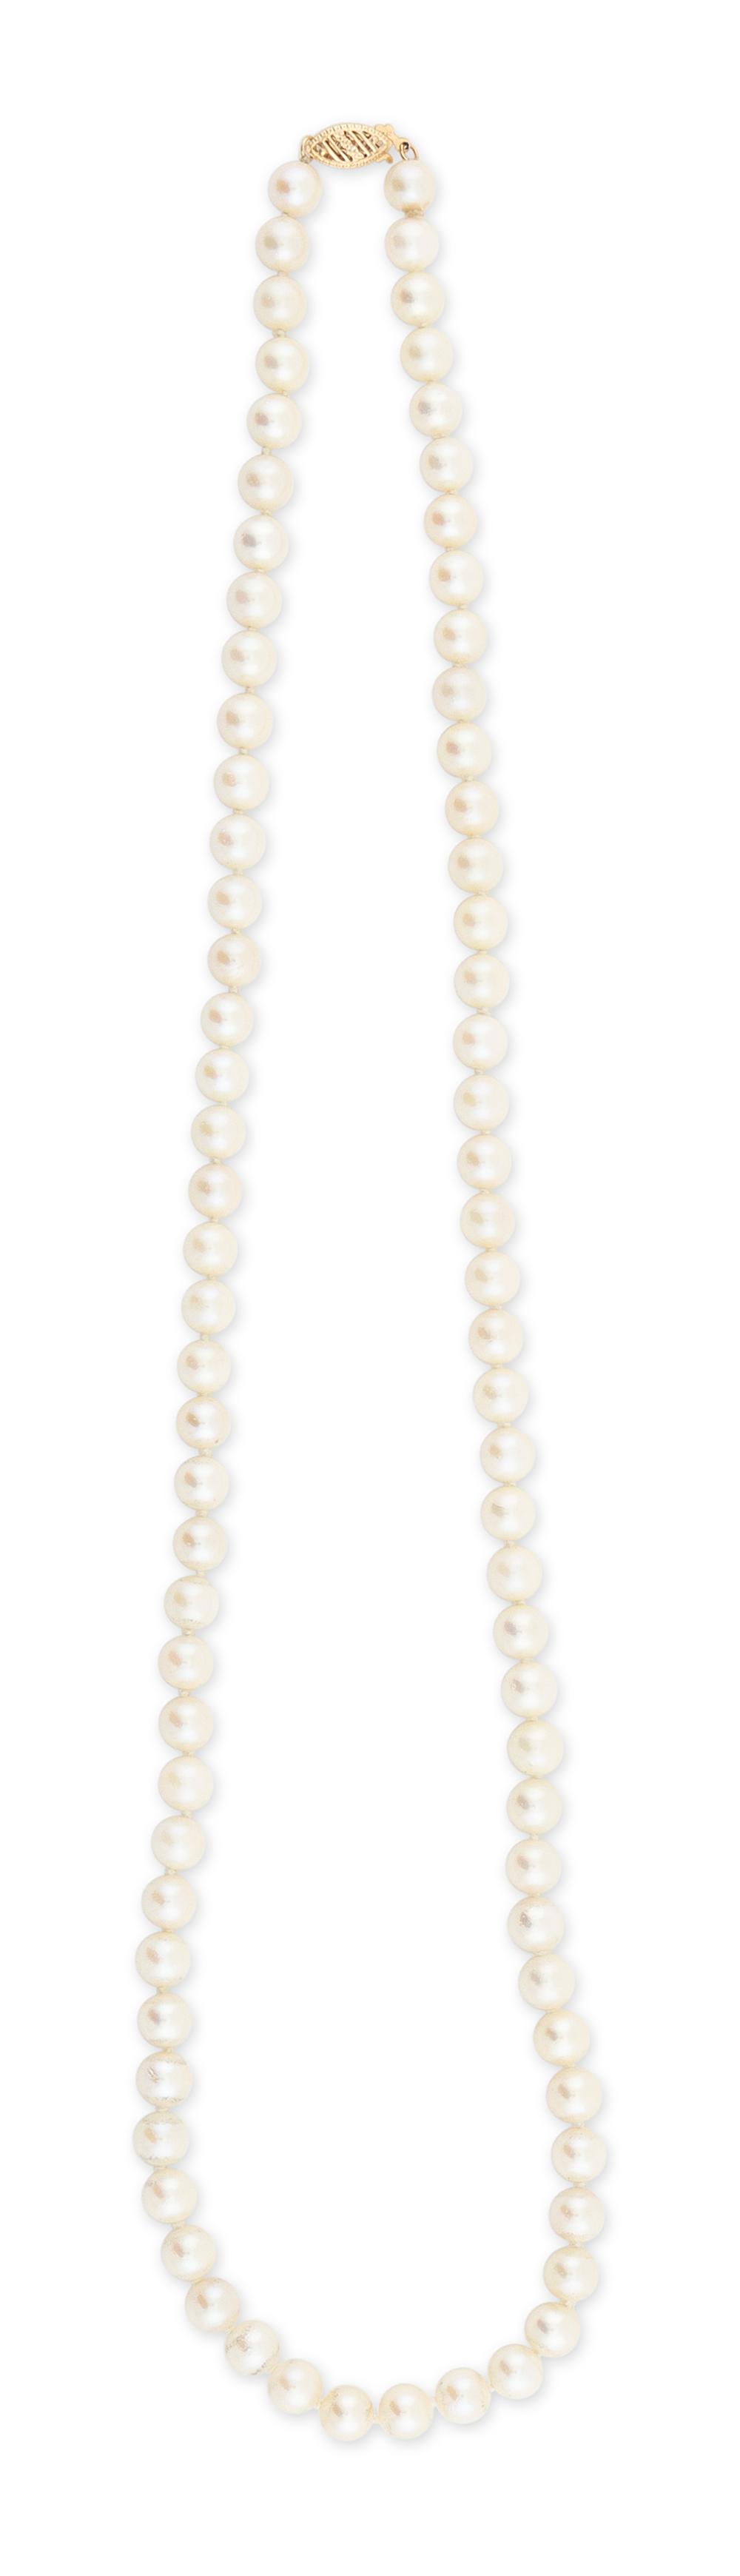 14KT GOLD AND CULTURED PEARL NECKLACE14KT